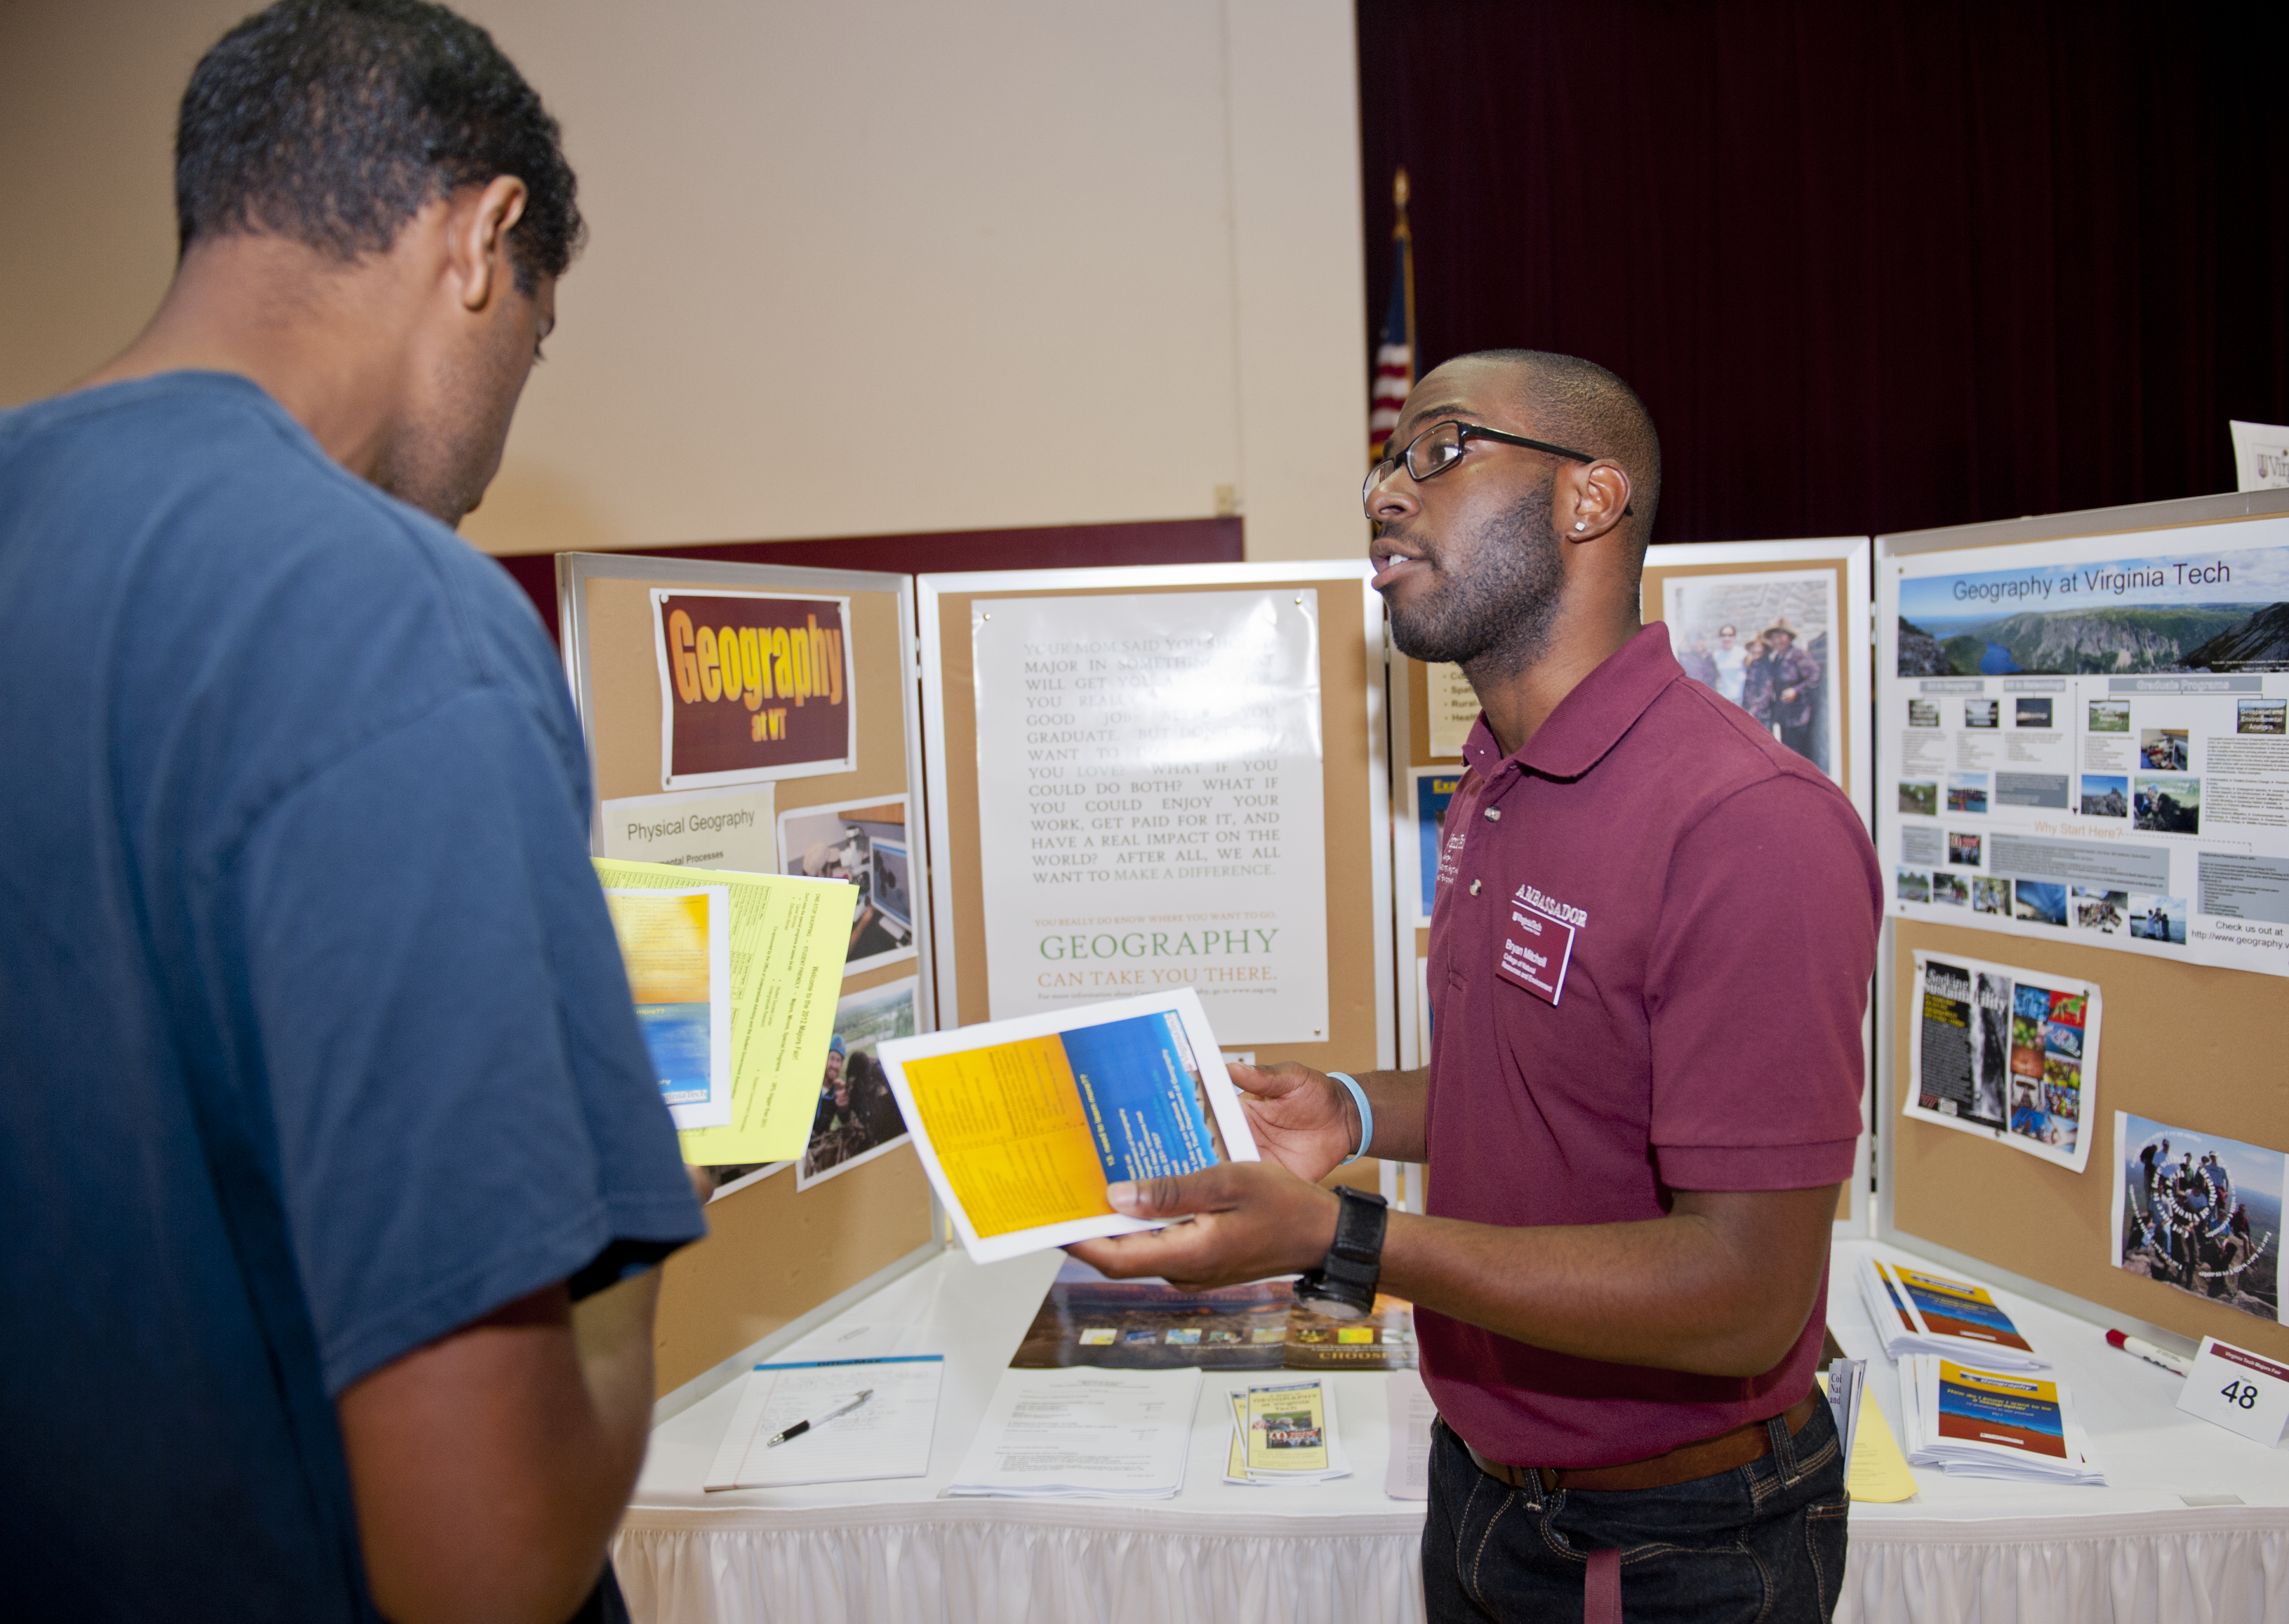 Students get information about academic disciplines at the 2012 Majors Fair